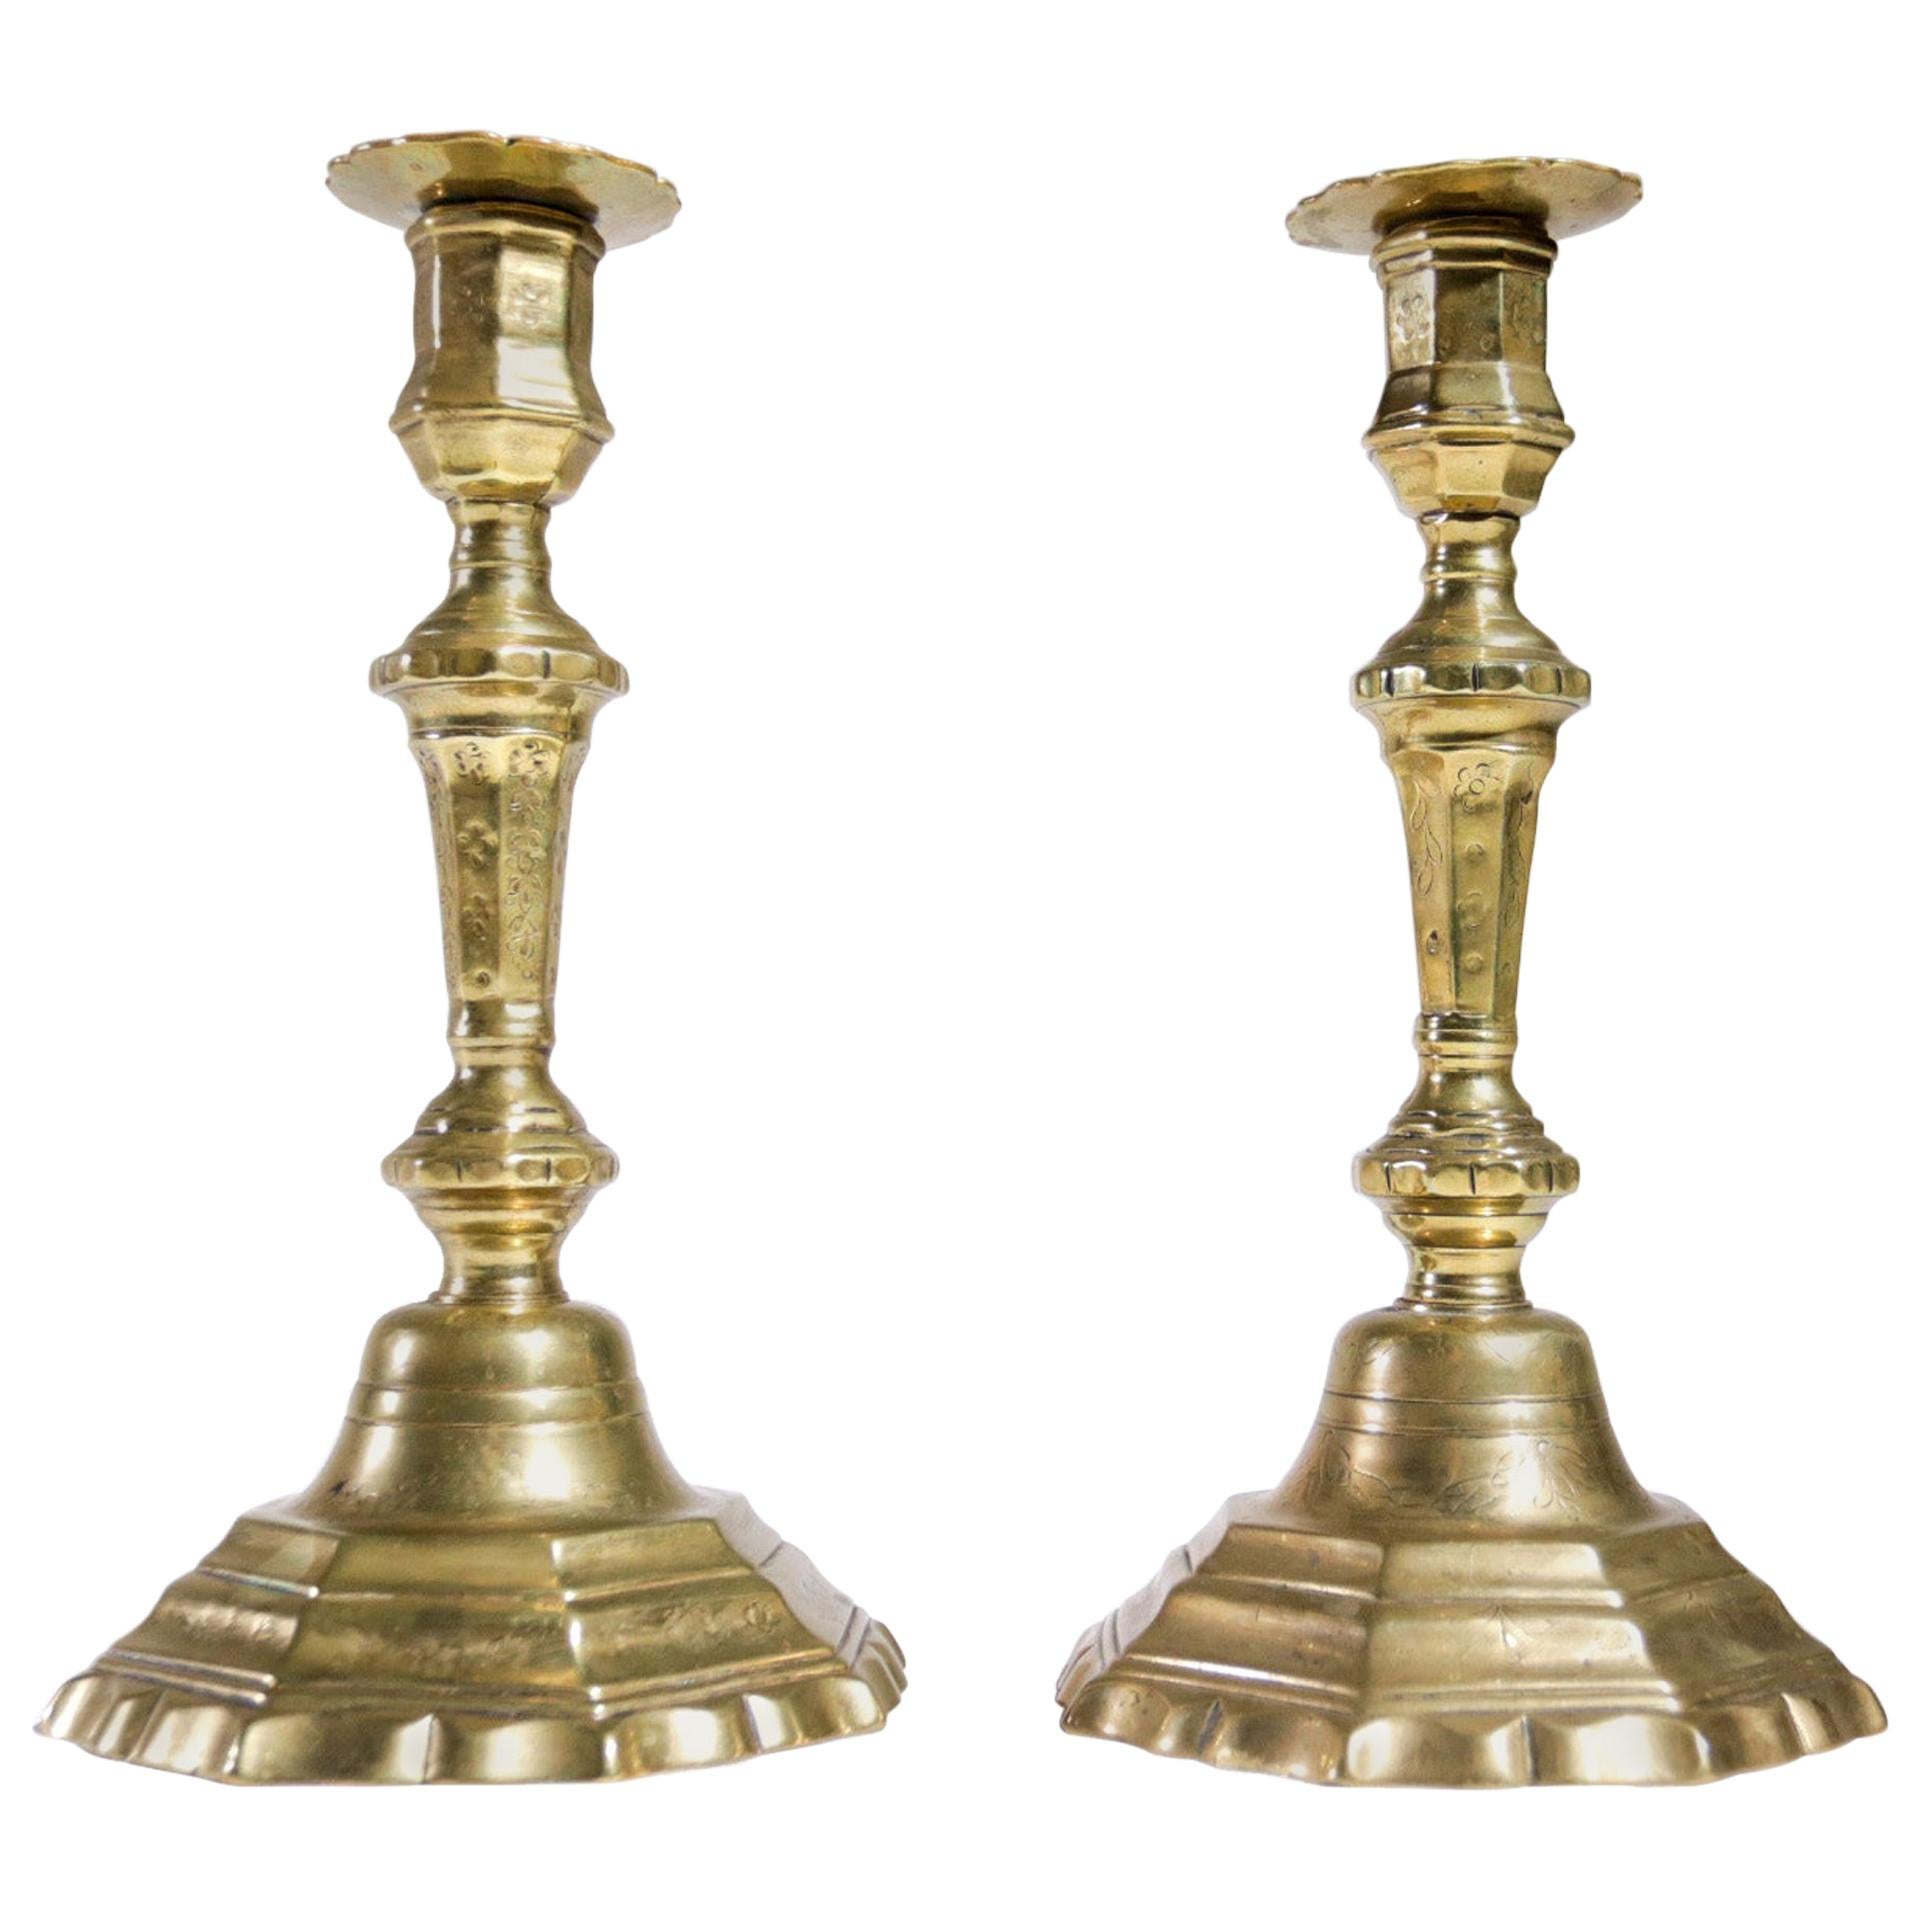 Pair of French 18th Century Brass Candlesticks Rare Decoration Free Shipping